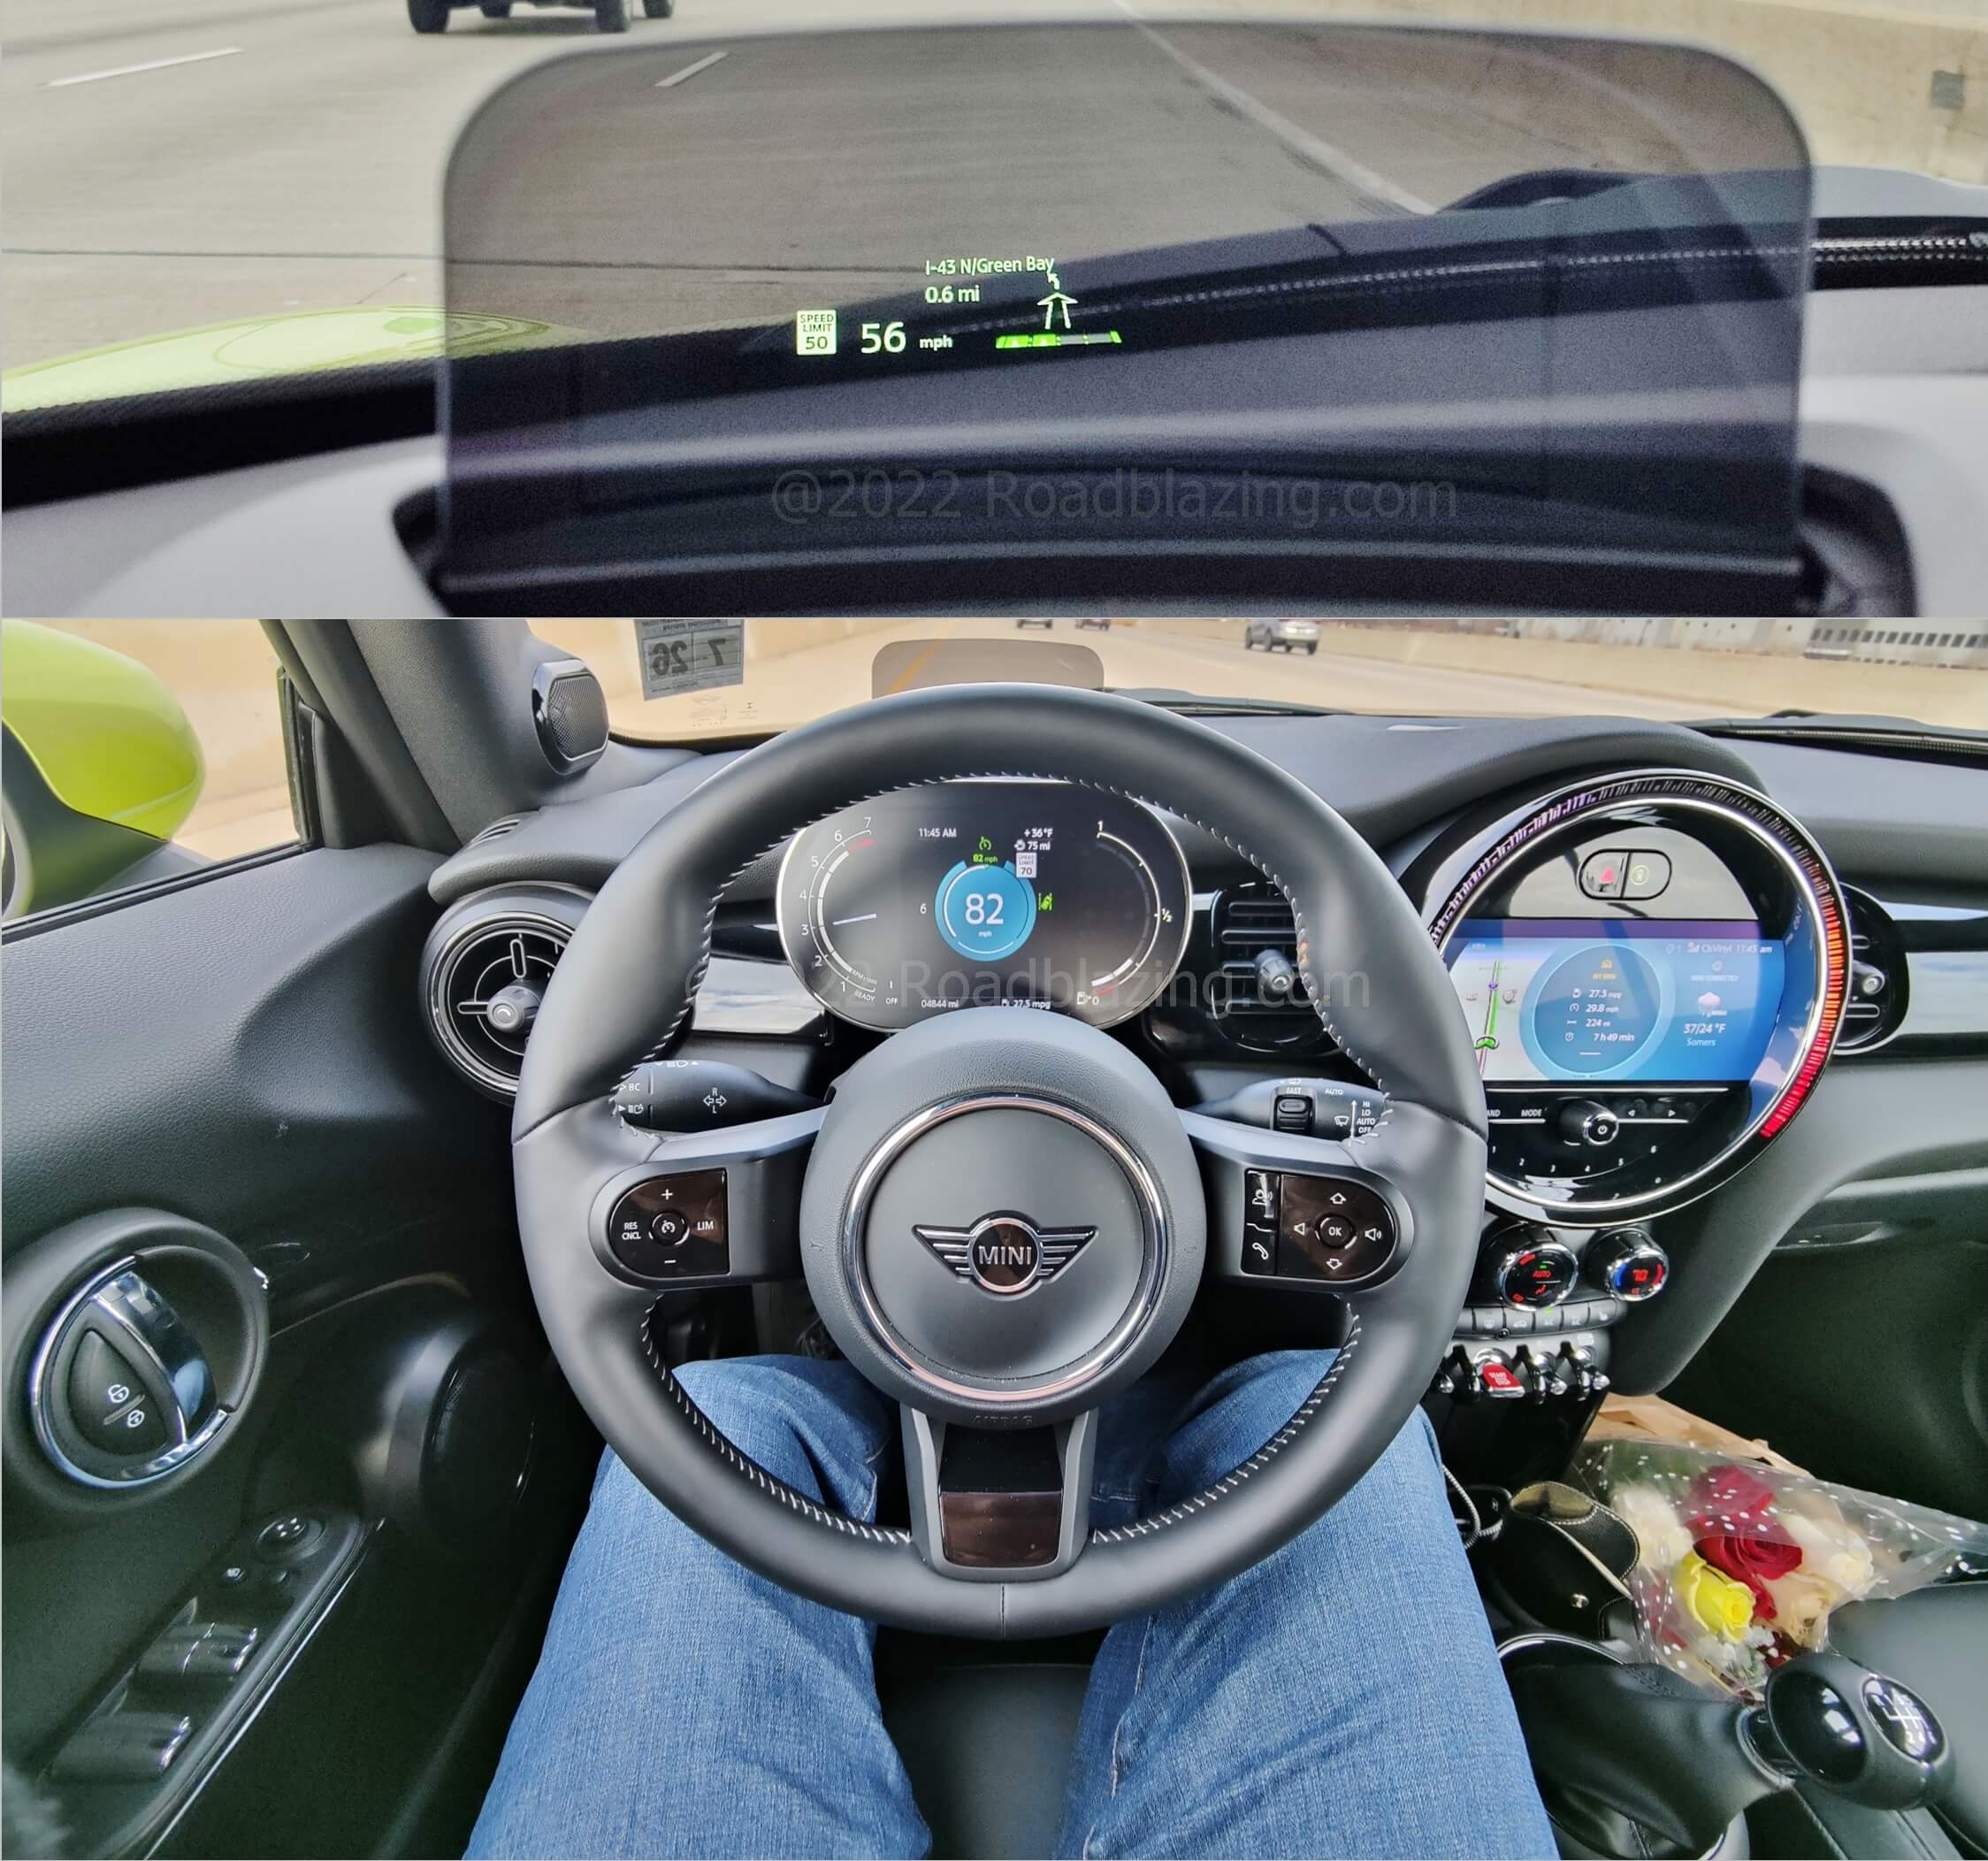 2022 MINI Cooper S Convertible: driving w/ available HUD display